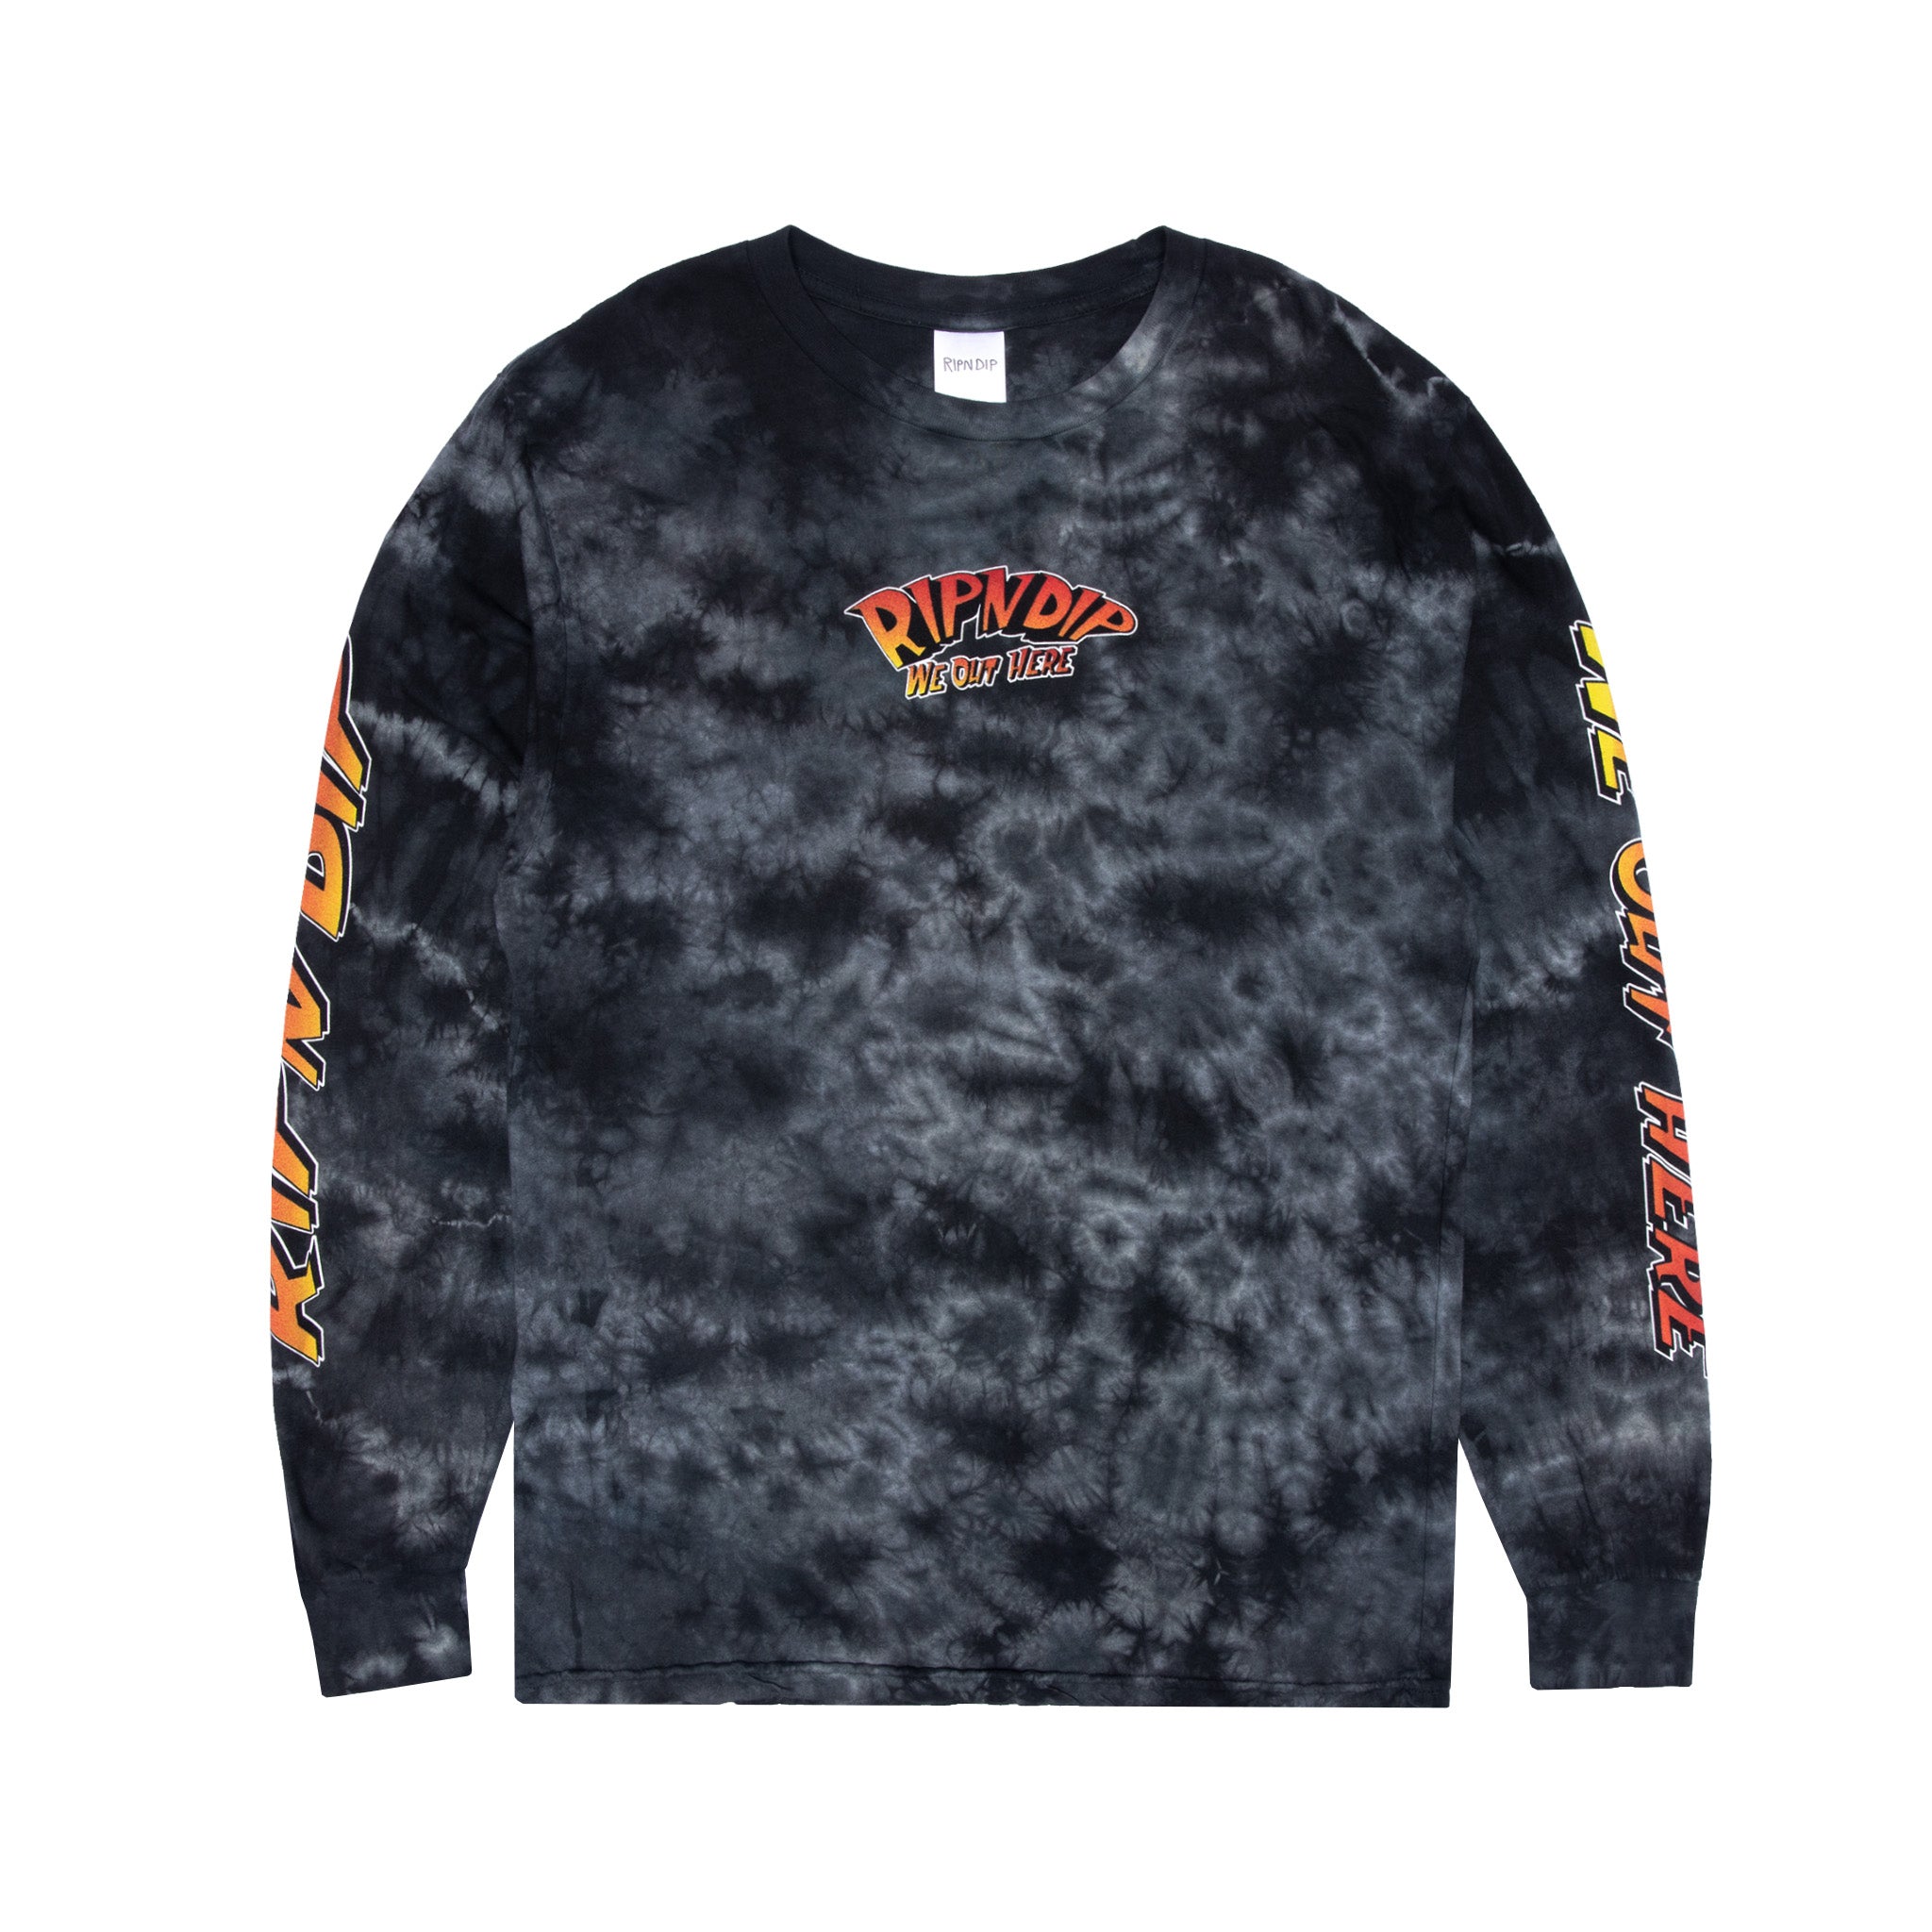 RipNDip Out Of This World Long Sleeve (Black Lightning Wash)